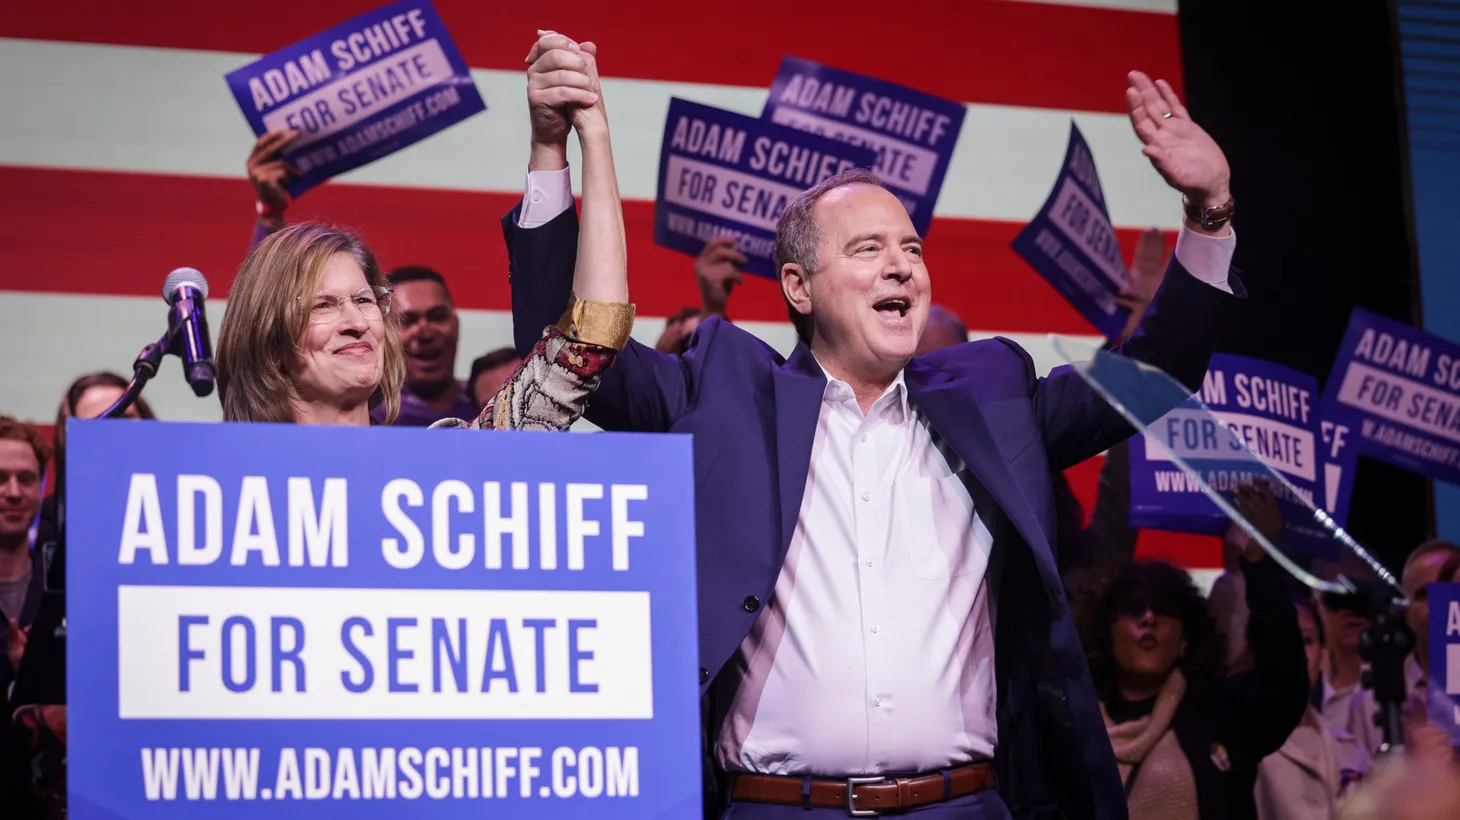 Eve Schiff and Adam Schiff wave at the crowd at a campaign event, after Schiff advances in the California runoff Senate race on March 5, 2024.